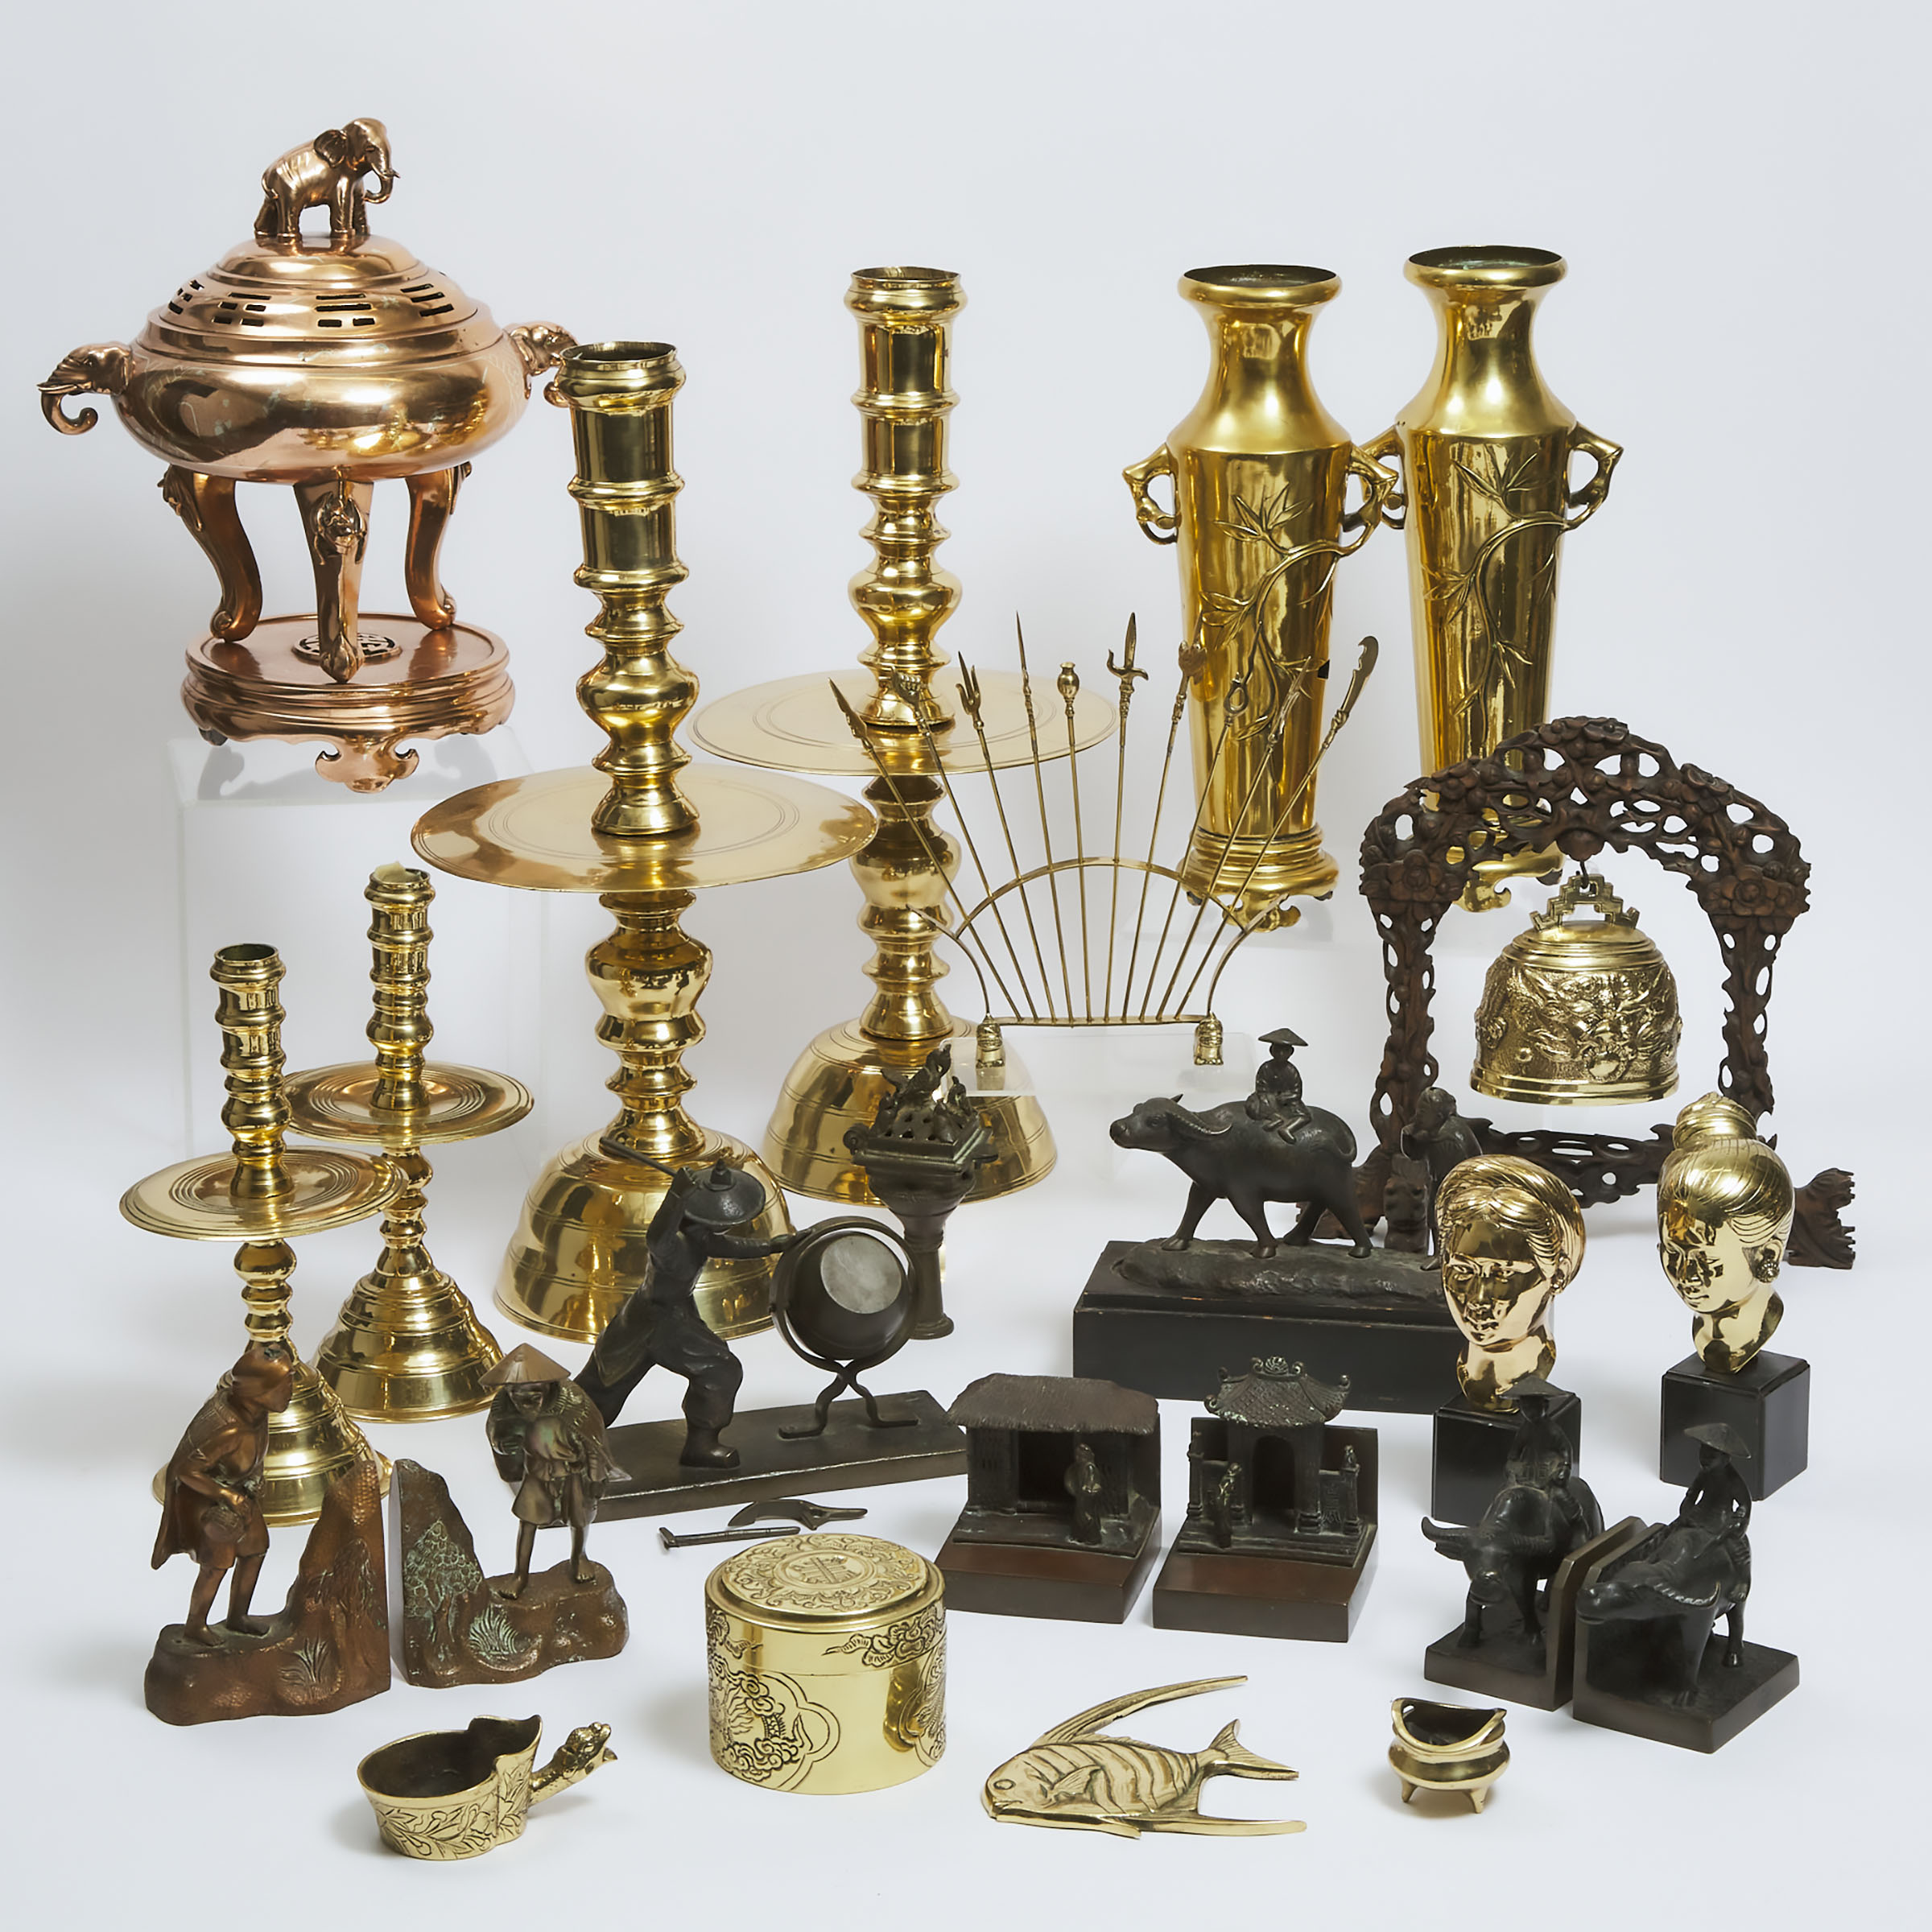 A Large Group of Twenty-Four Vietnamese Bronze and Brass Figures and Wares, Late 19th/20th Century